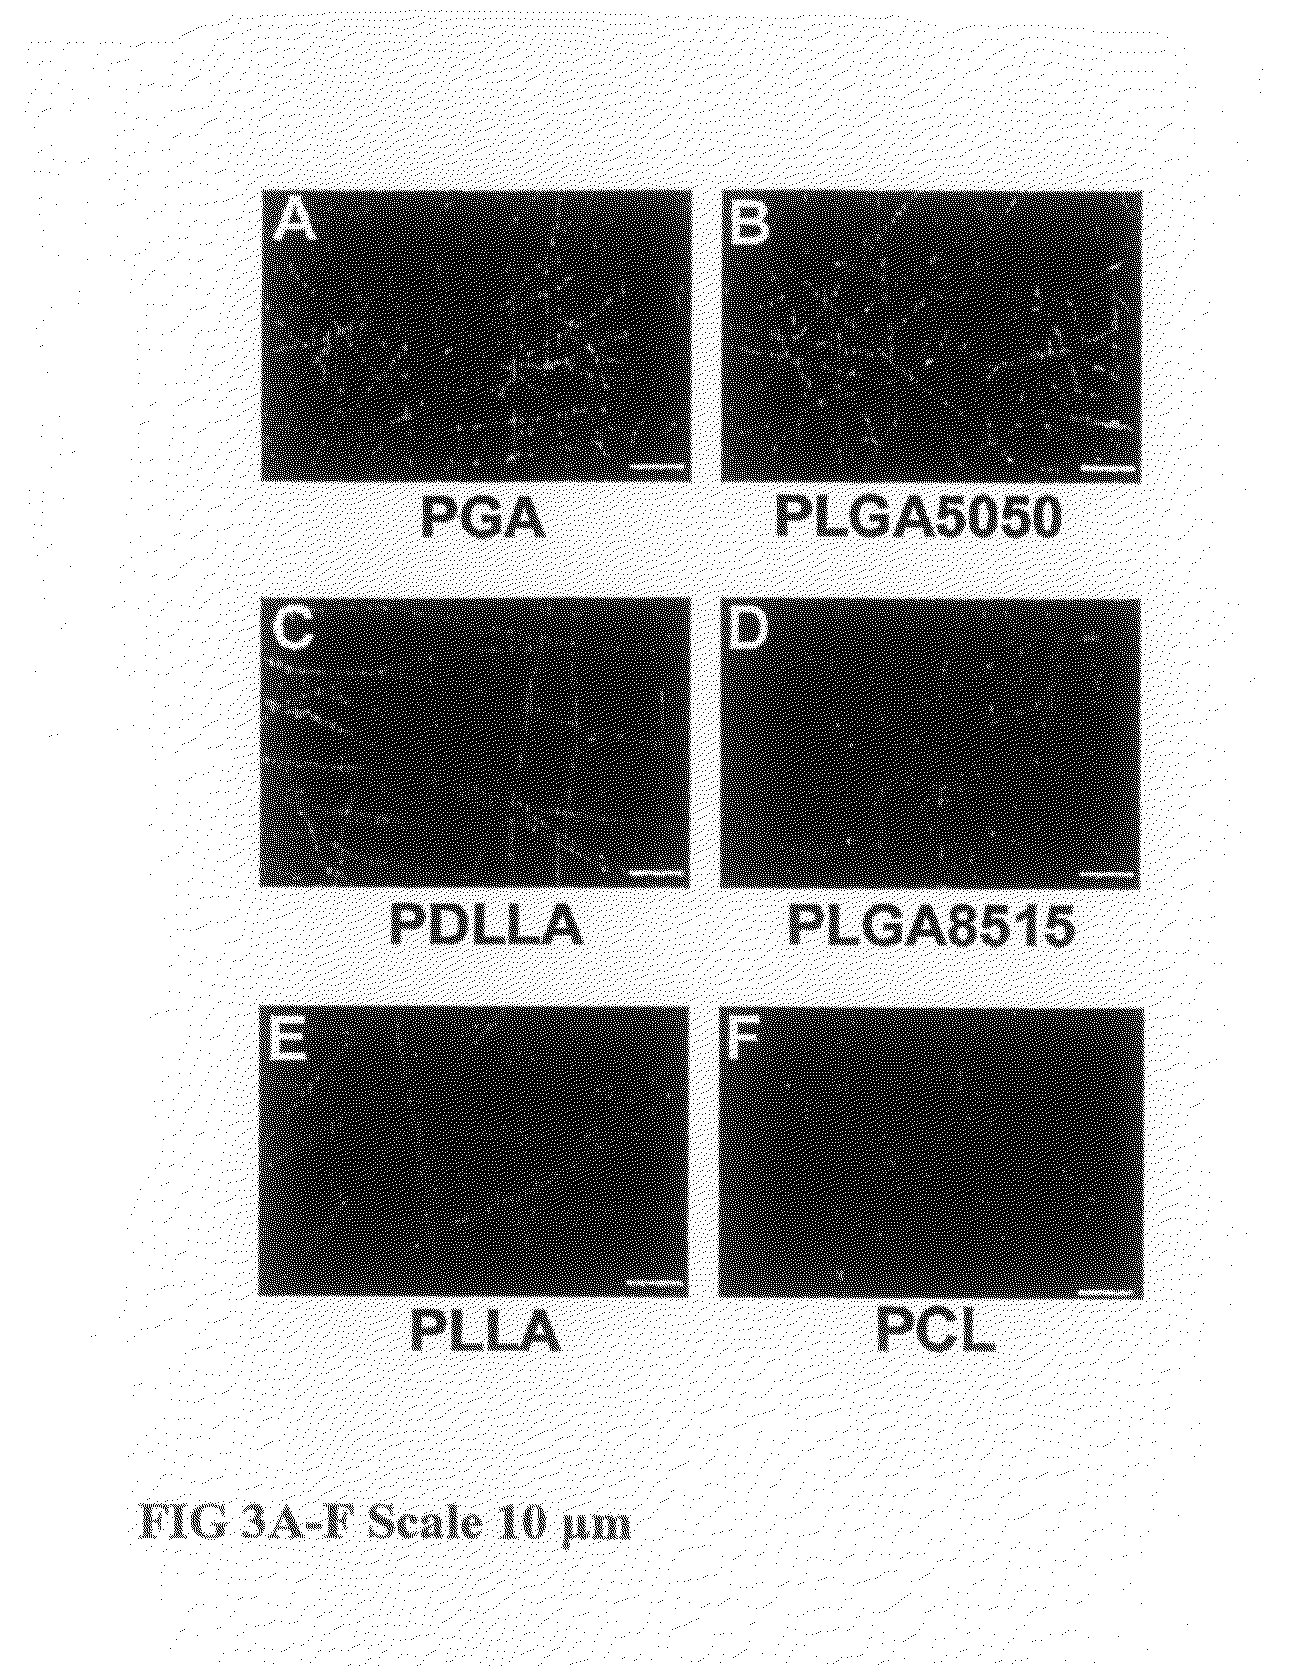 Tissue Engineered Cartilage, Method of Making Same, Therapeutic and Cosmetic Surgical Applications Using Same